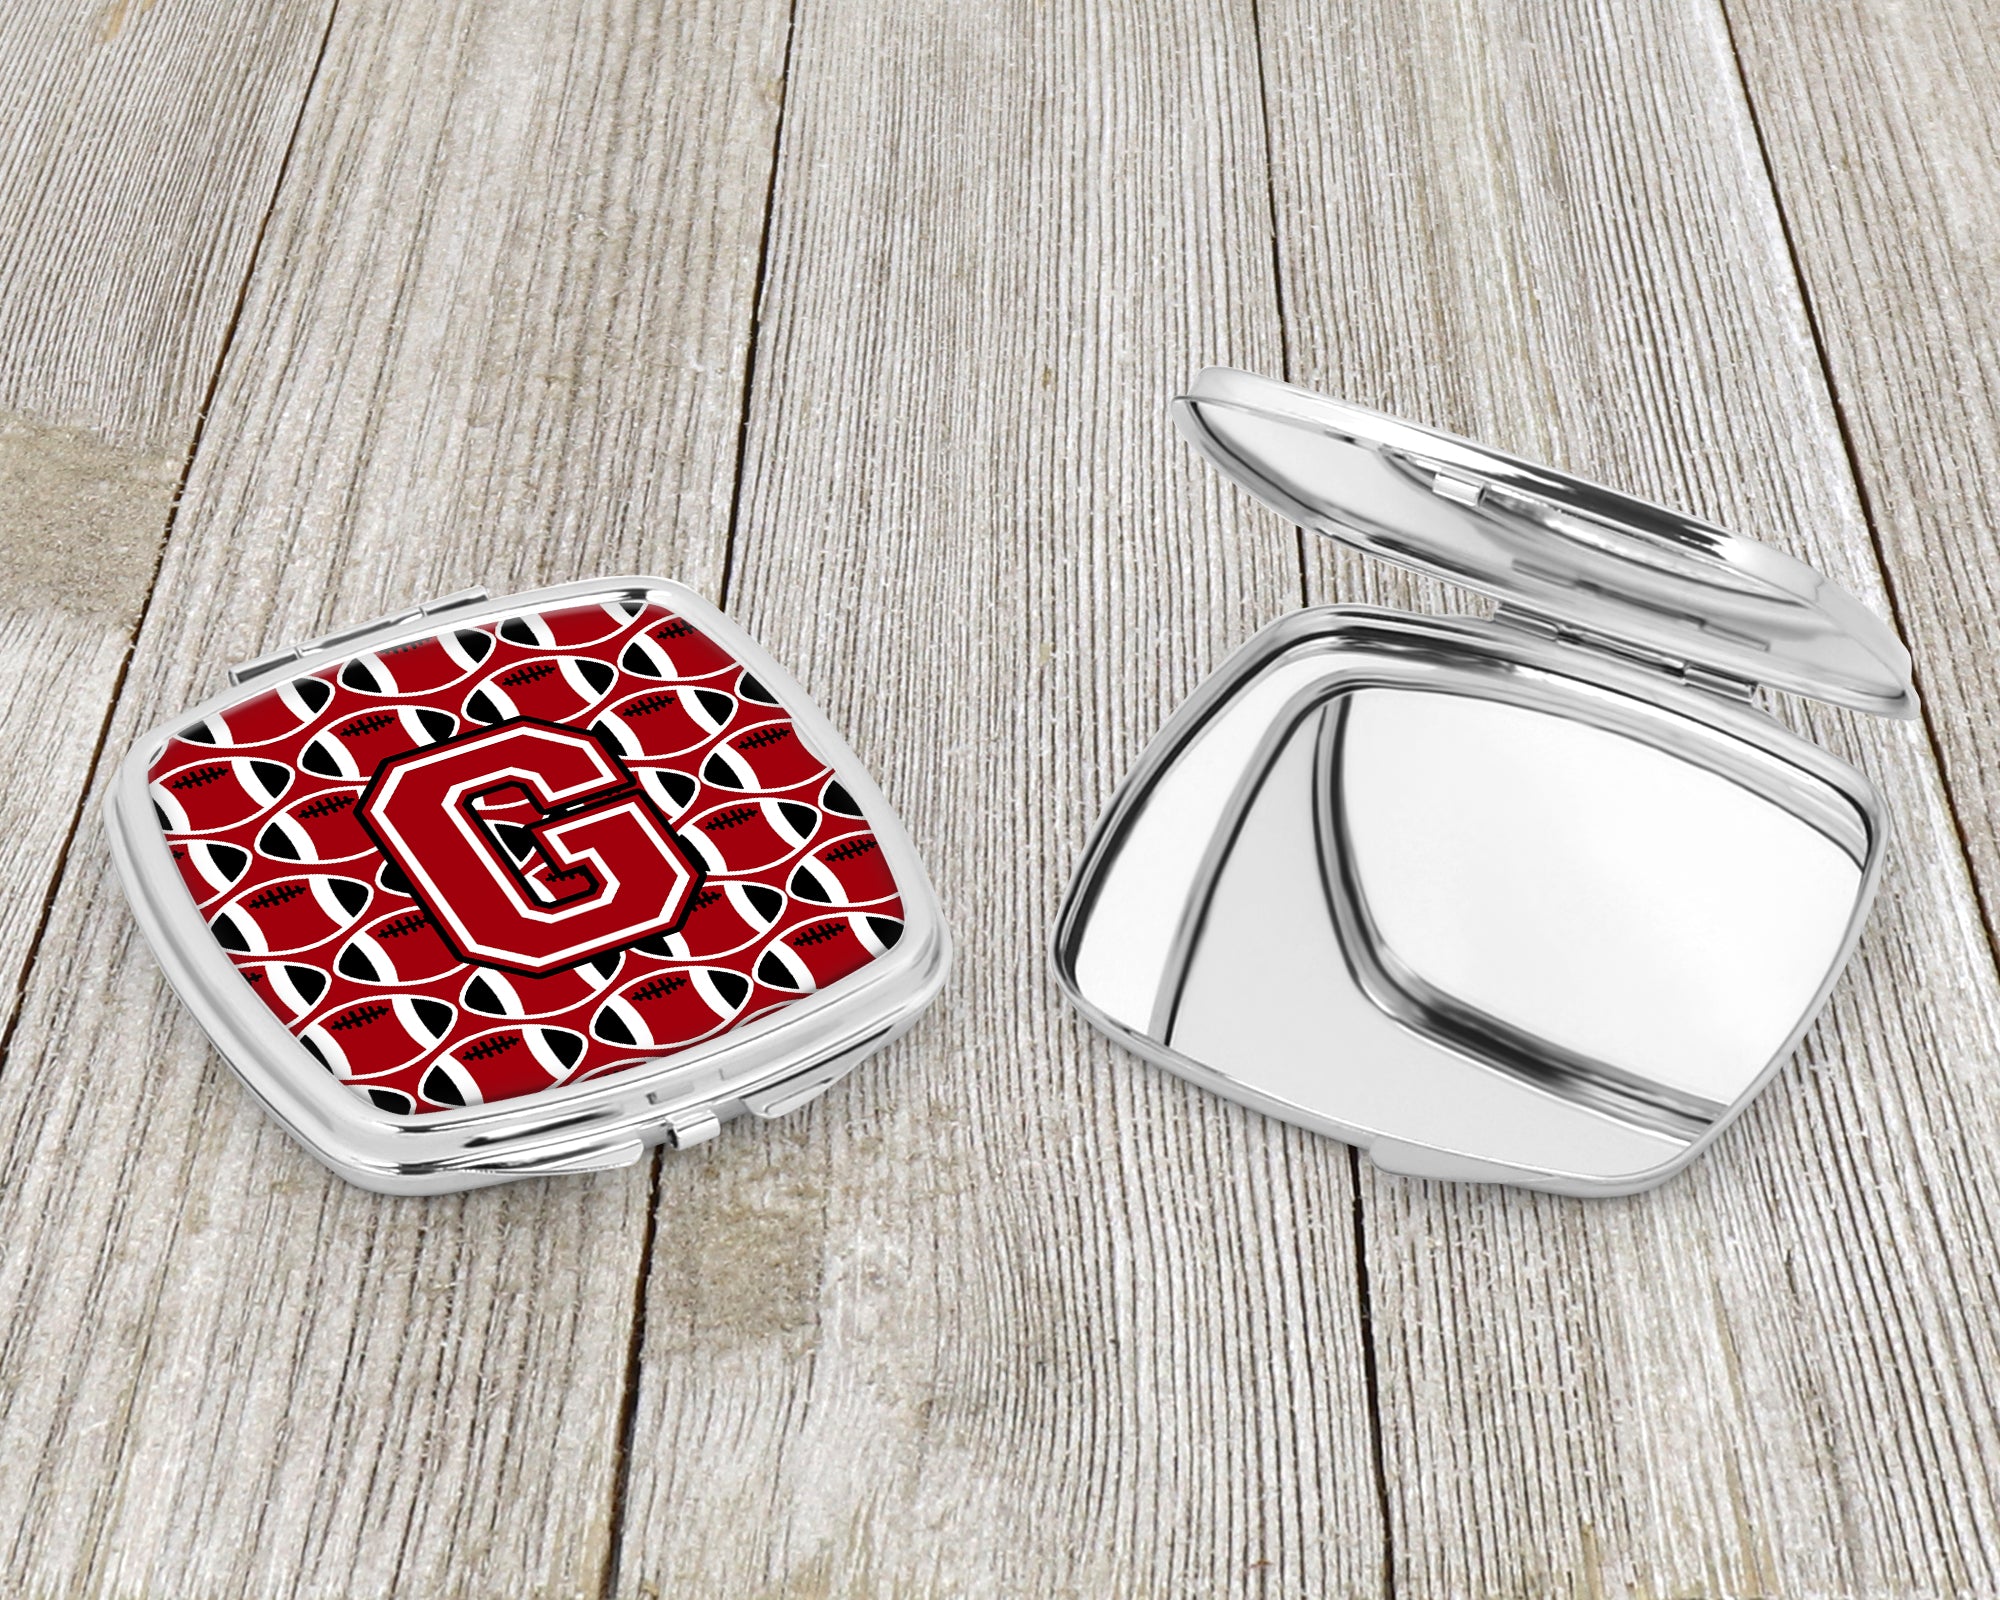 Letter G Football Red, Black and White Compact Mirror CJ1073-GSCM  the-store.com.